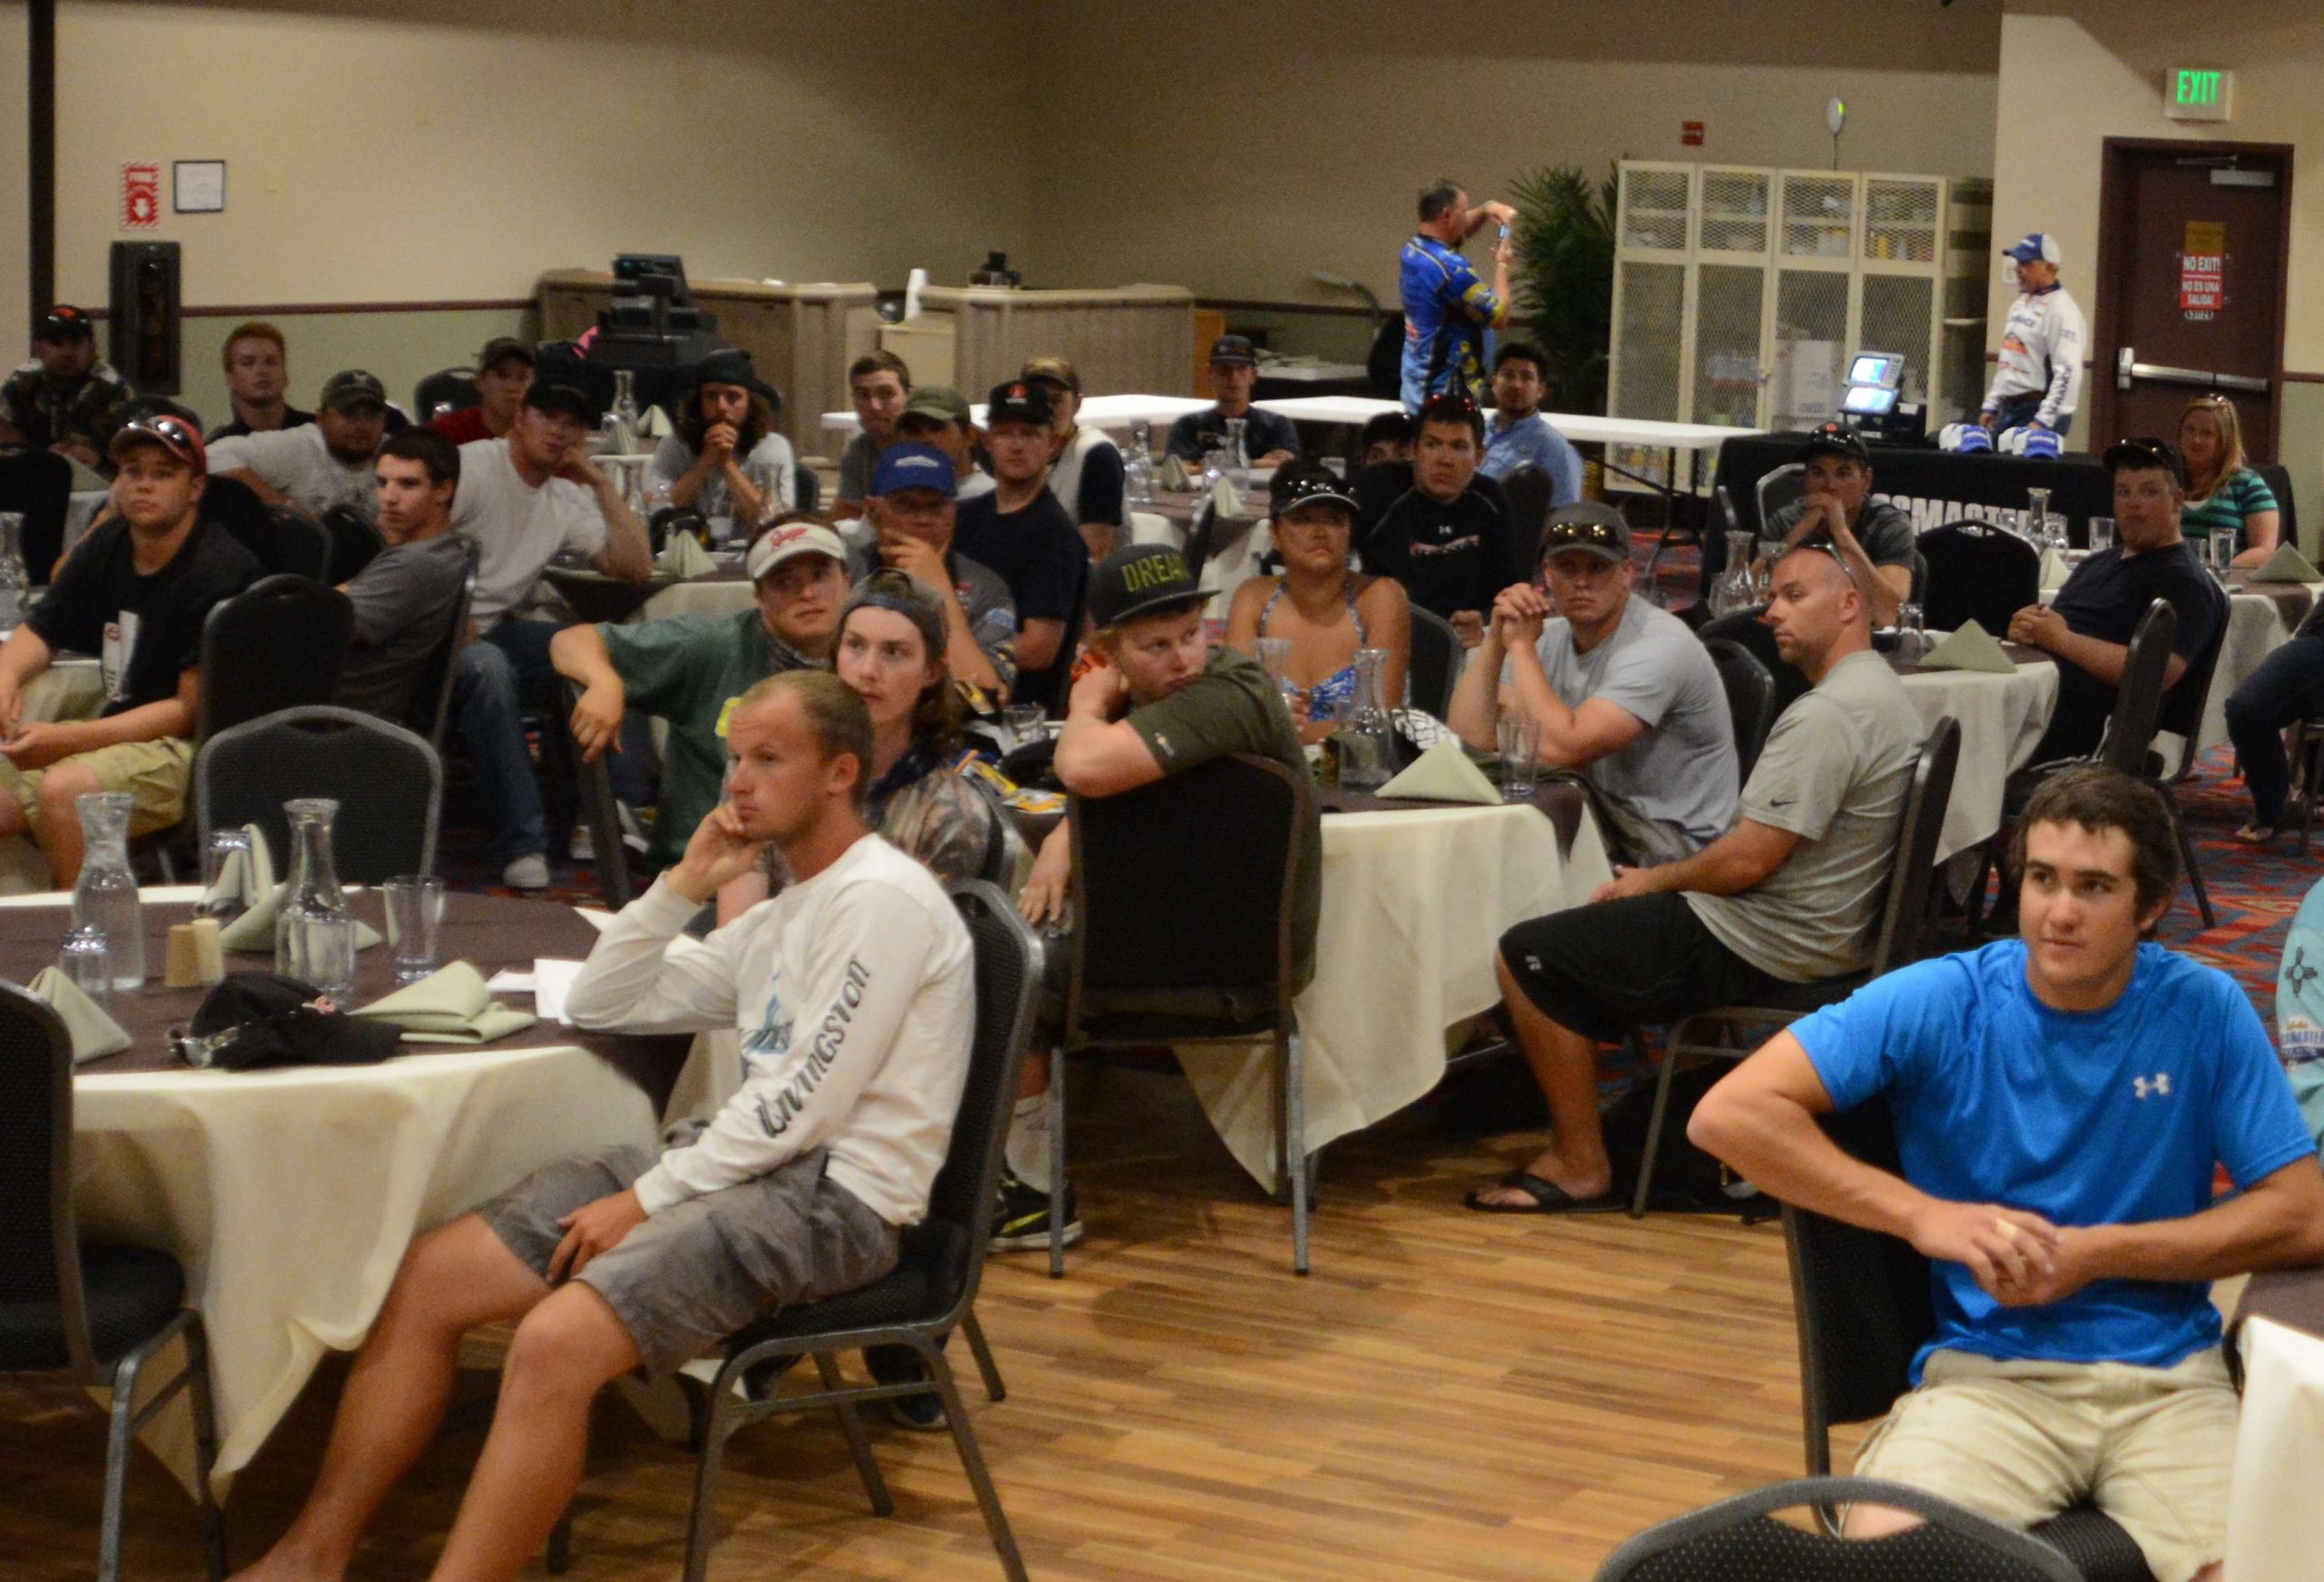 Anglers settle in for the tournament briefing at the Konocti Vista Resort & Casino while Hank Weldon goes over the rules.